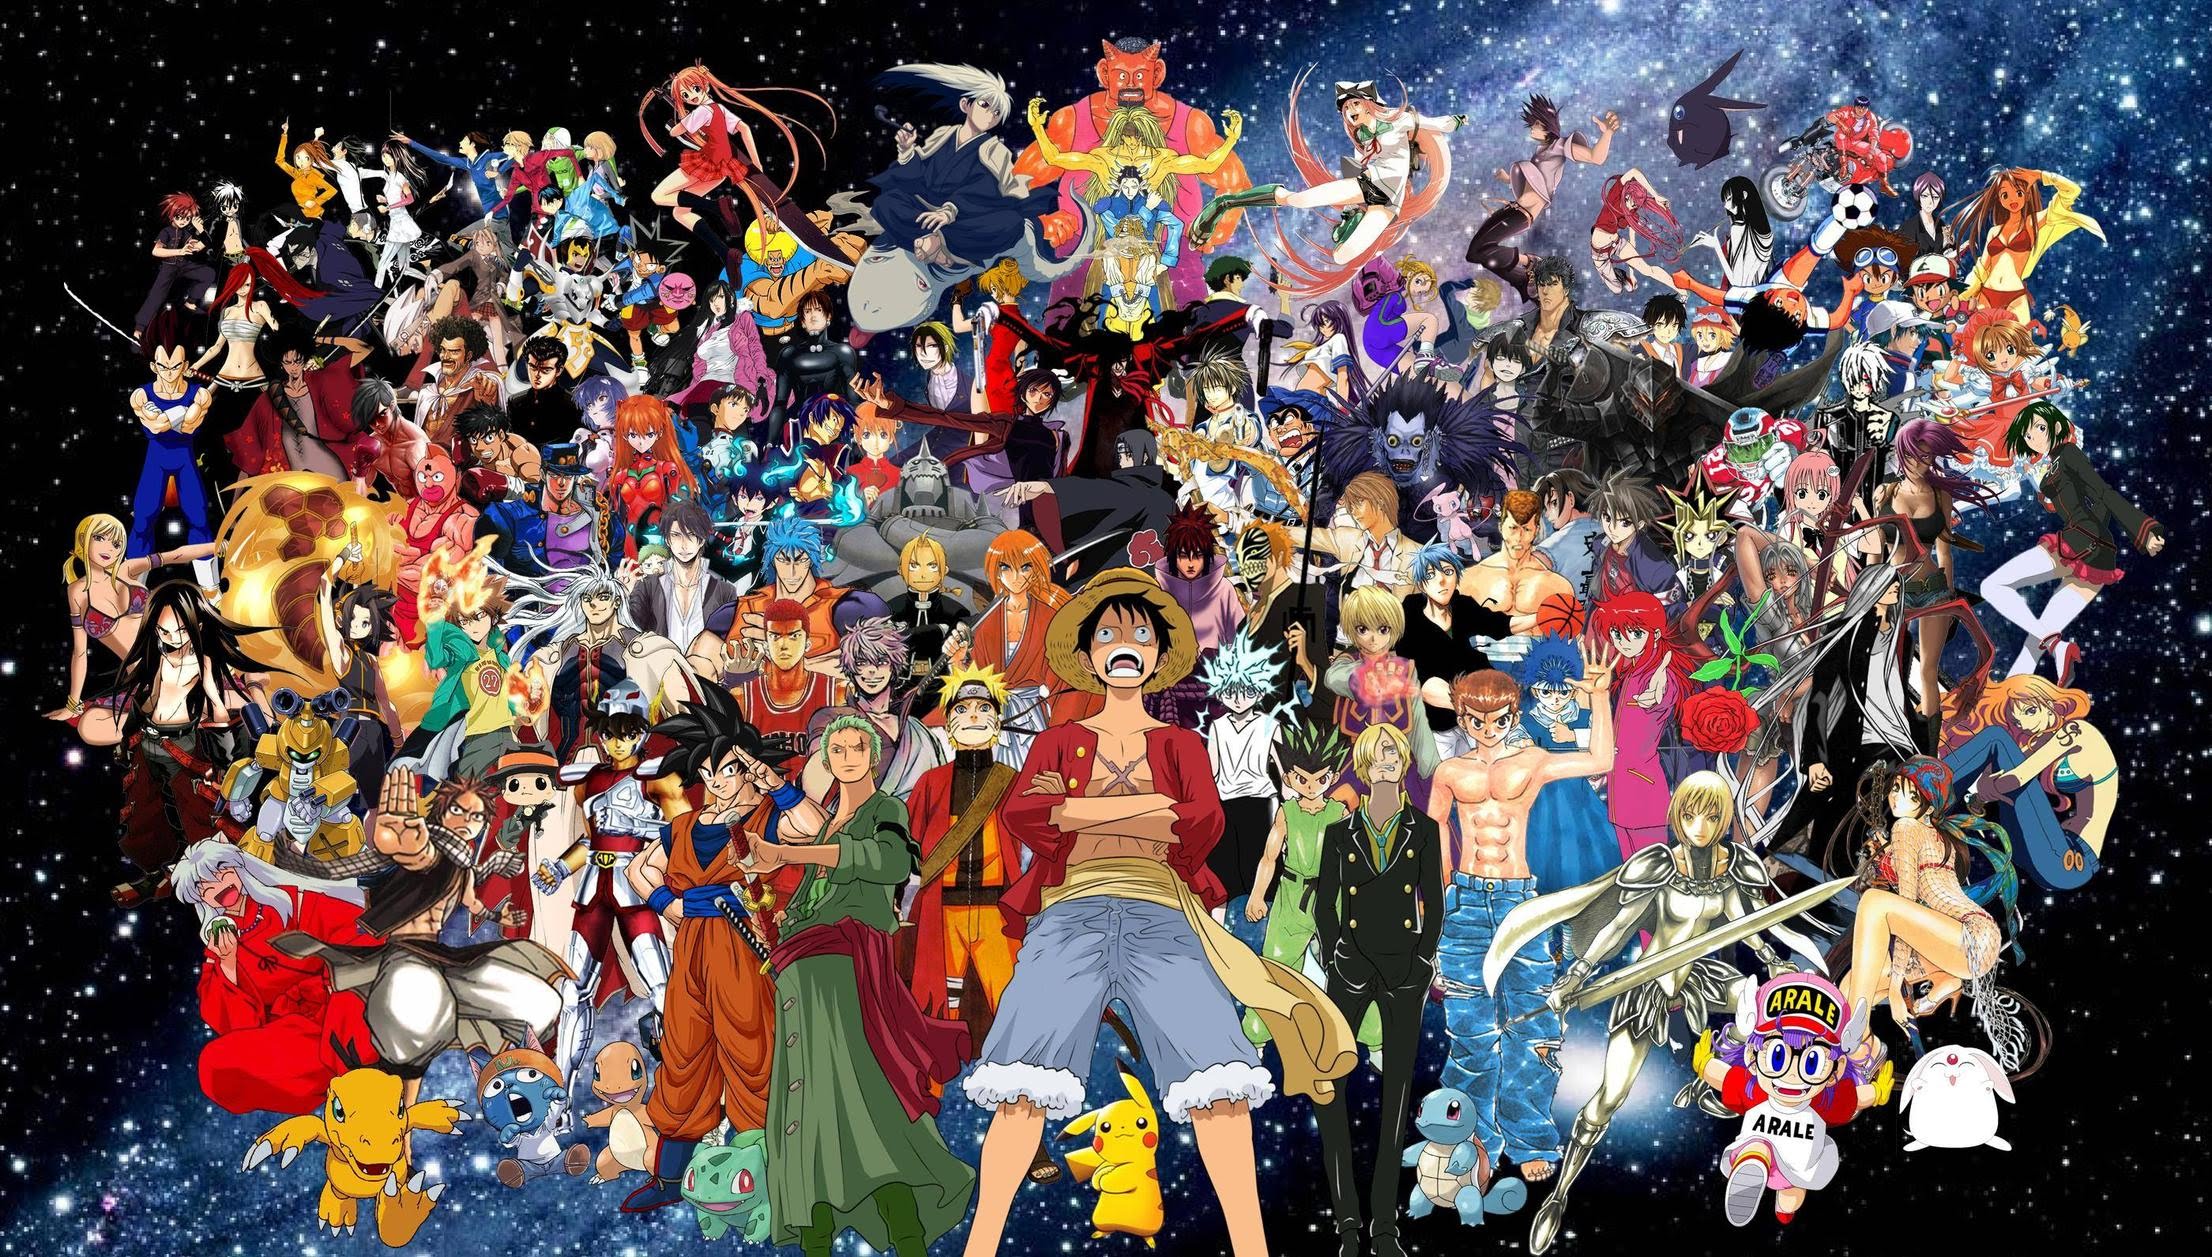 A large group of anime characters standing together.